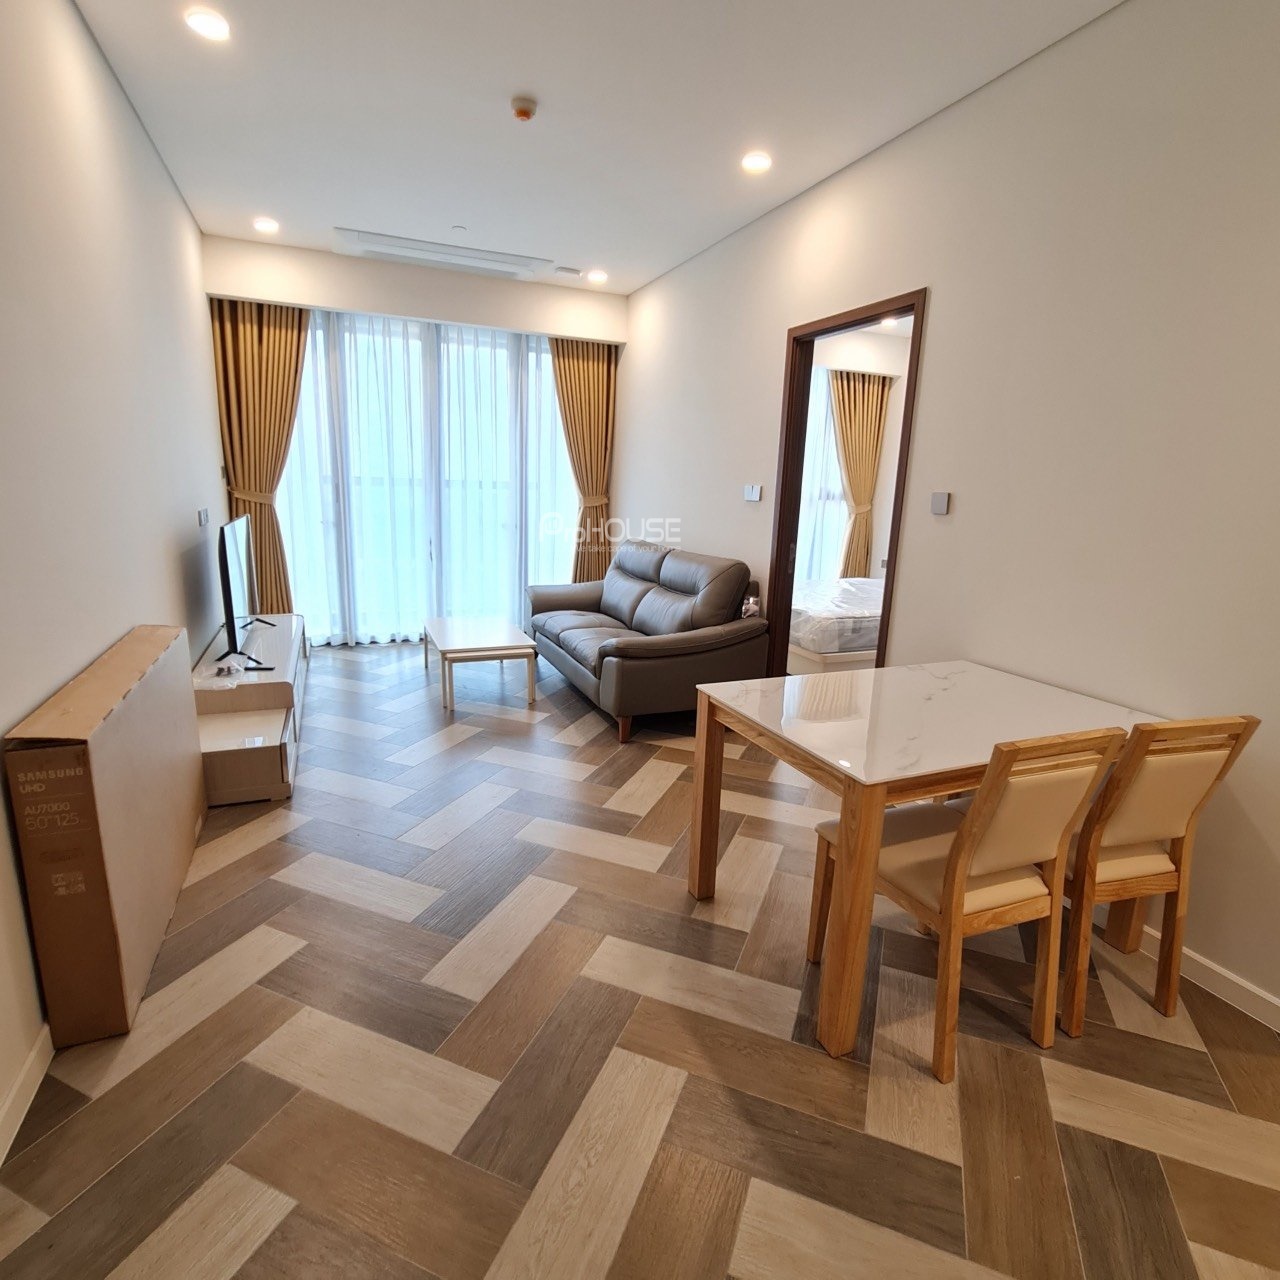 1 bedroom apartment for rent in The Metropole with full furniture and open view